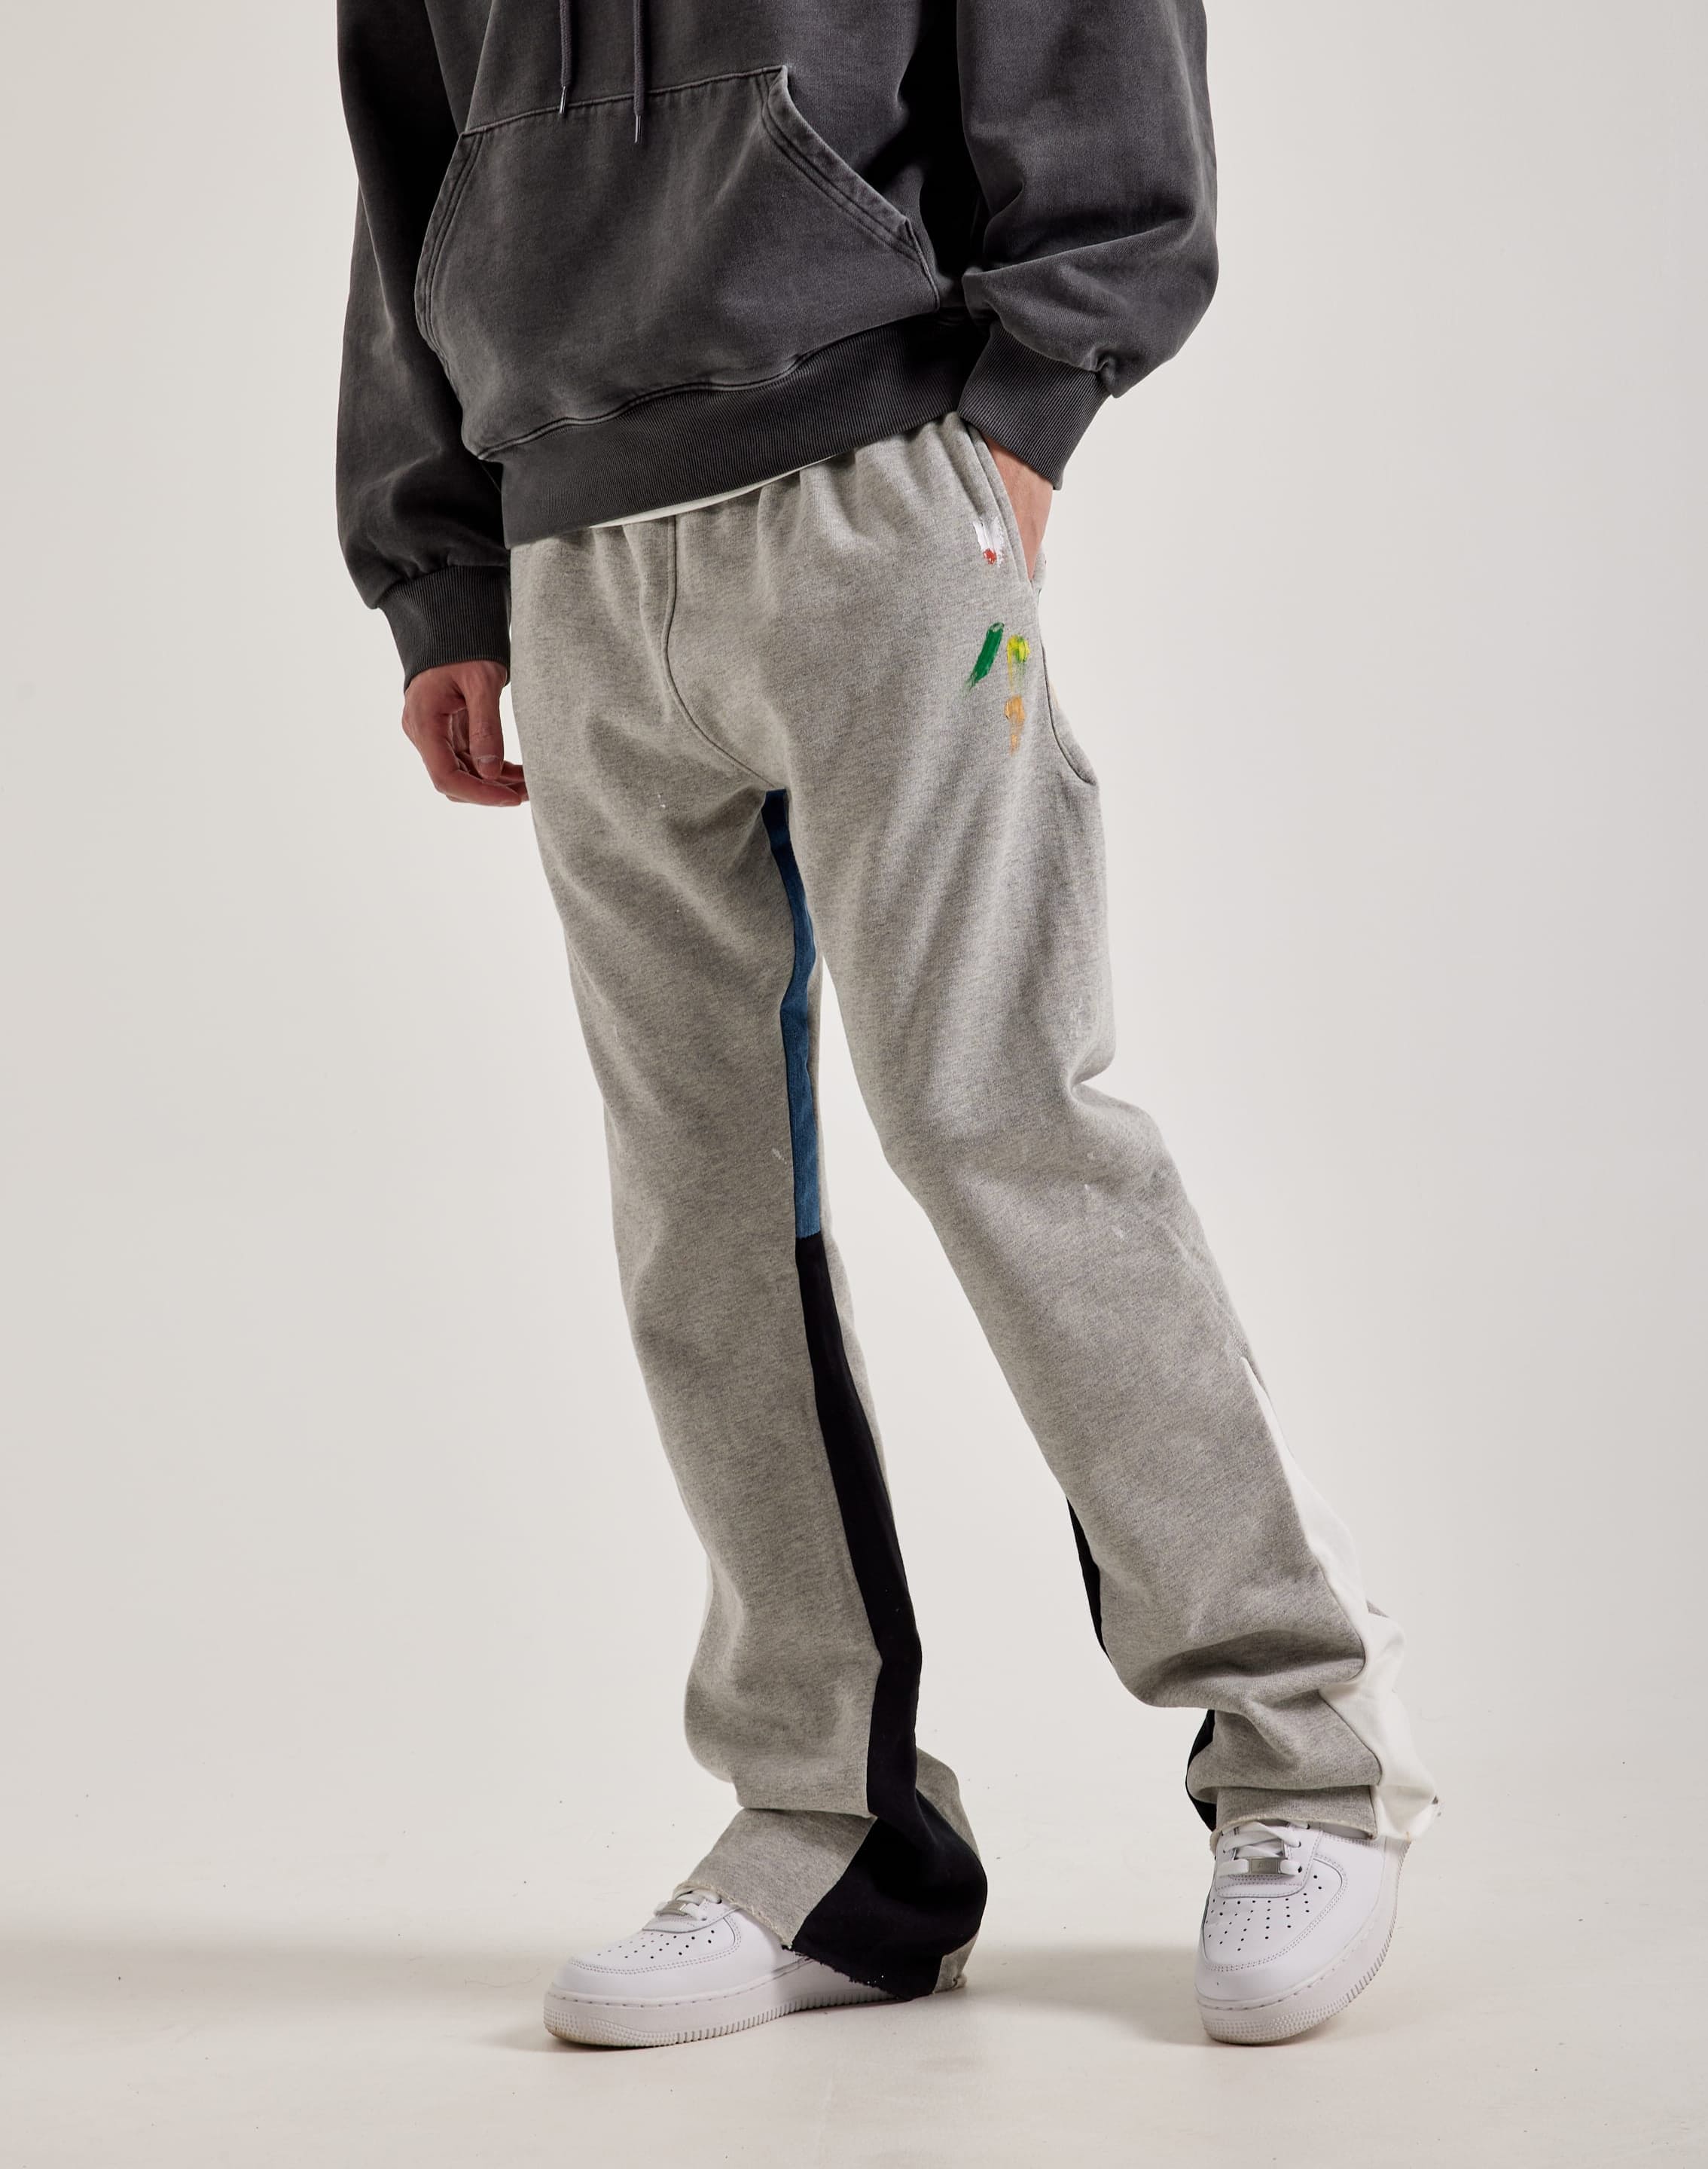 mnml - Contrast Bootcut Sweatpants + Hooded Coaches Jacket